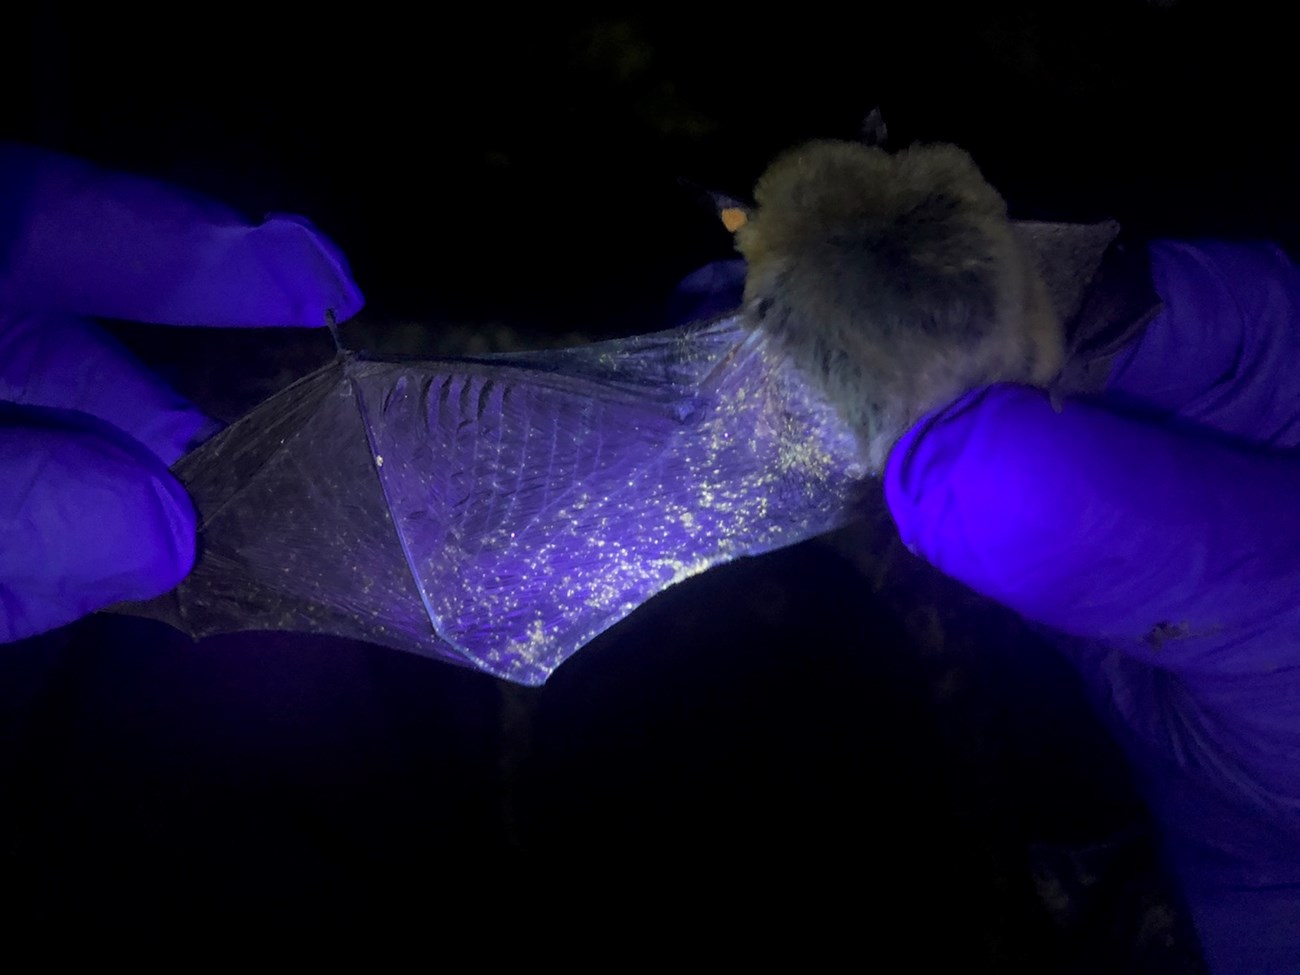 Purple-gloved hands stretch out the wing of a bat at night. Spots on the wing glow yellow-orange as it is illuminated under purplish UV light.